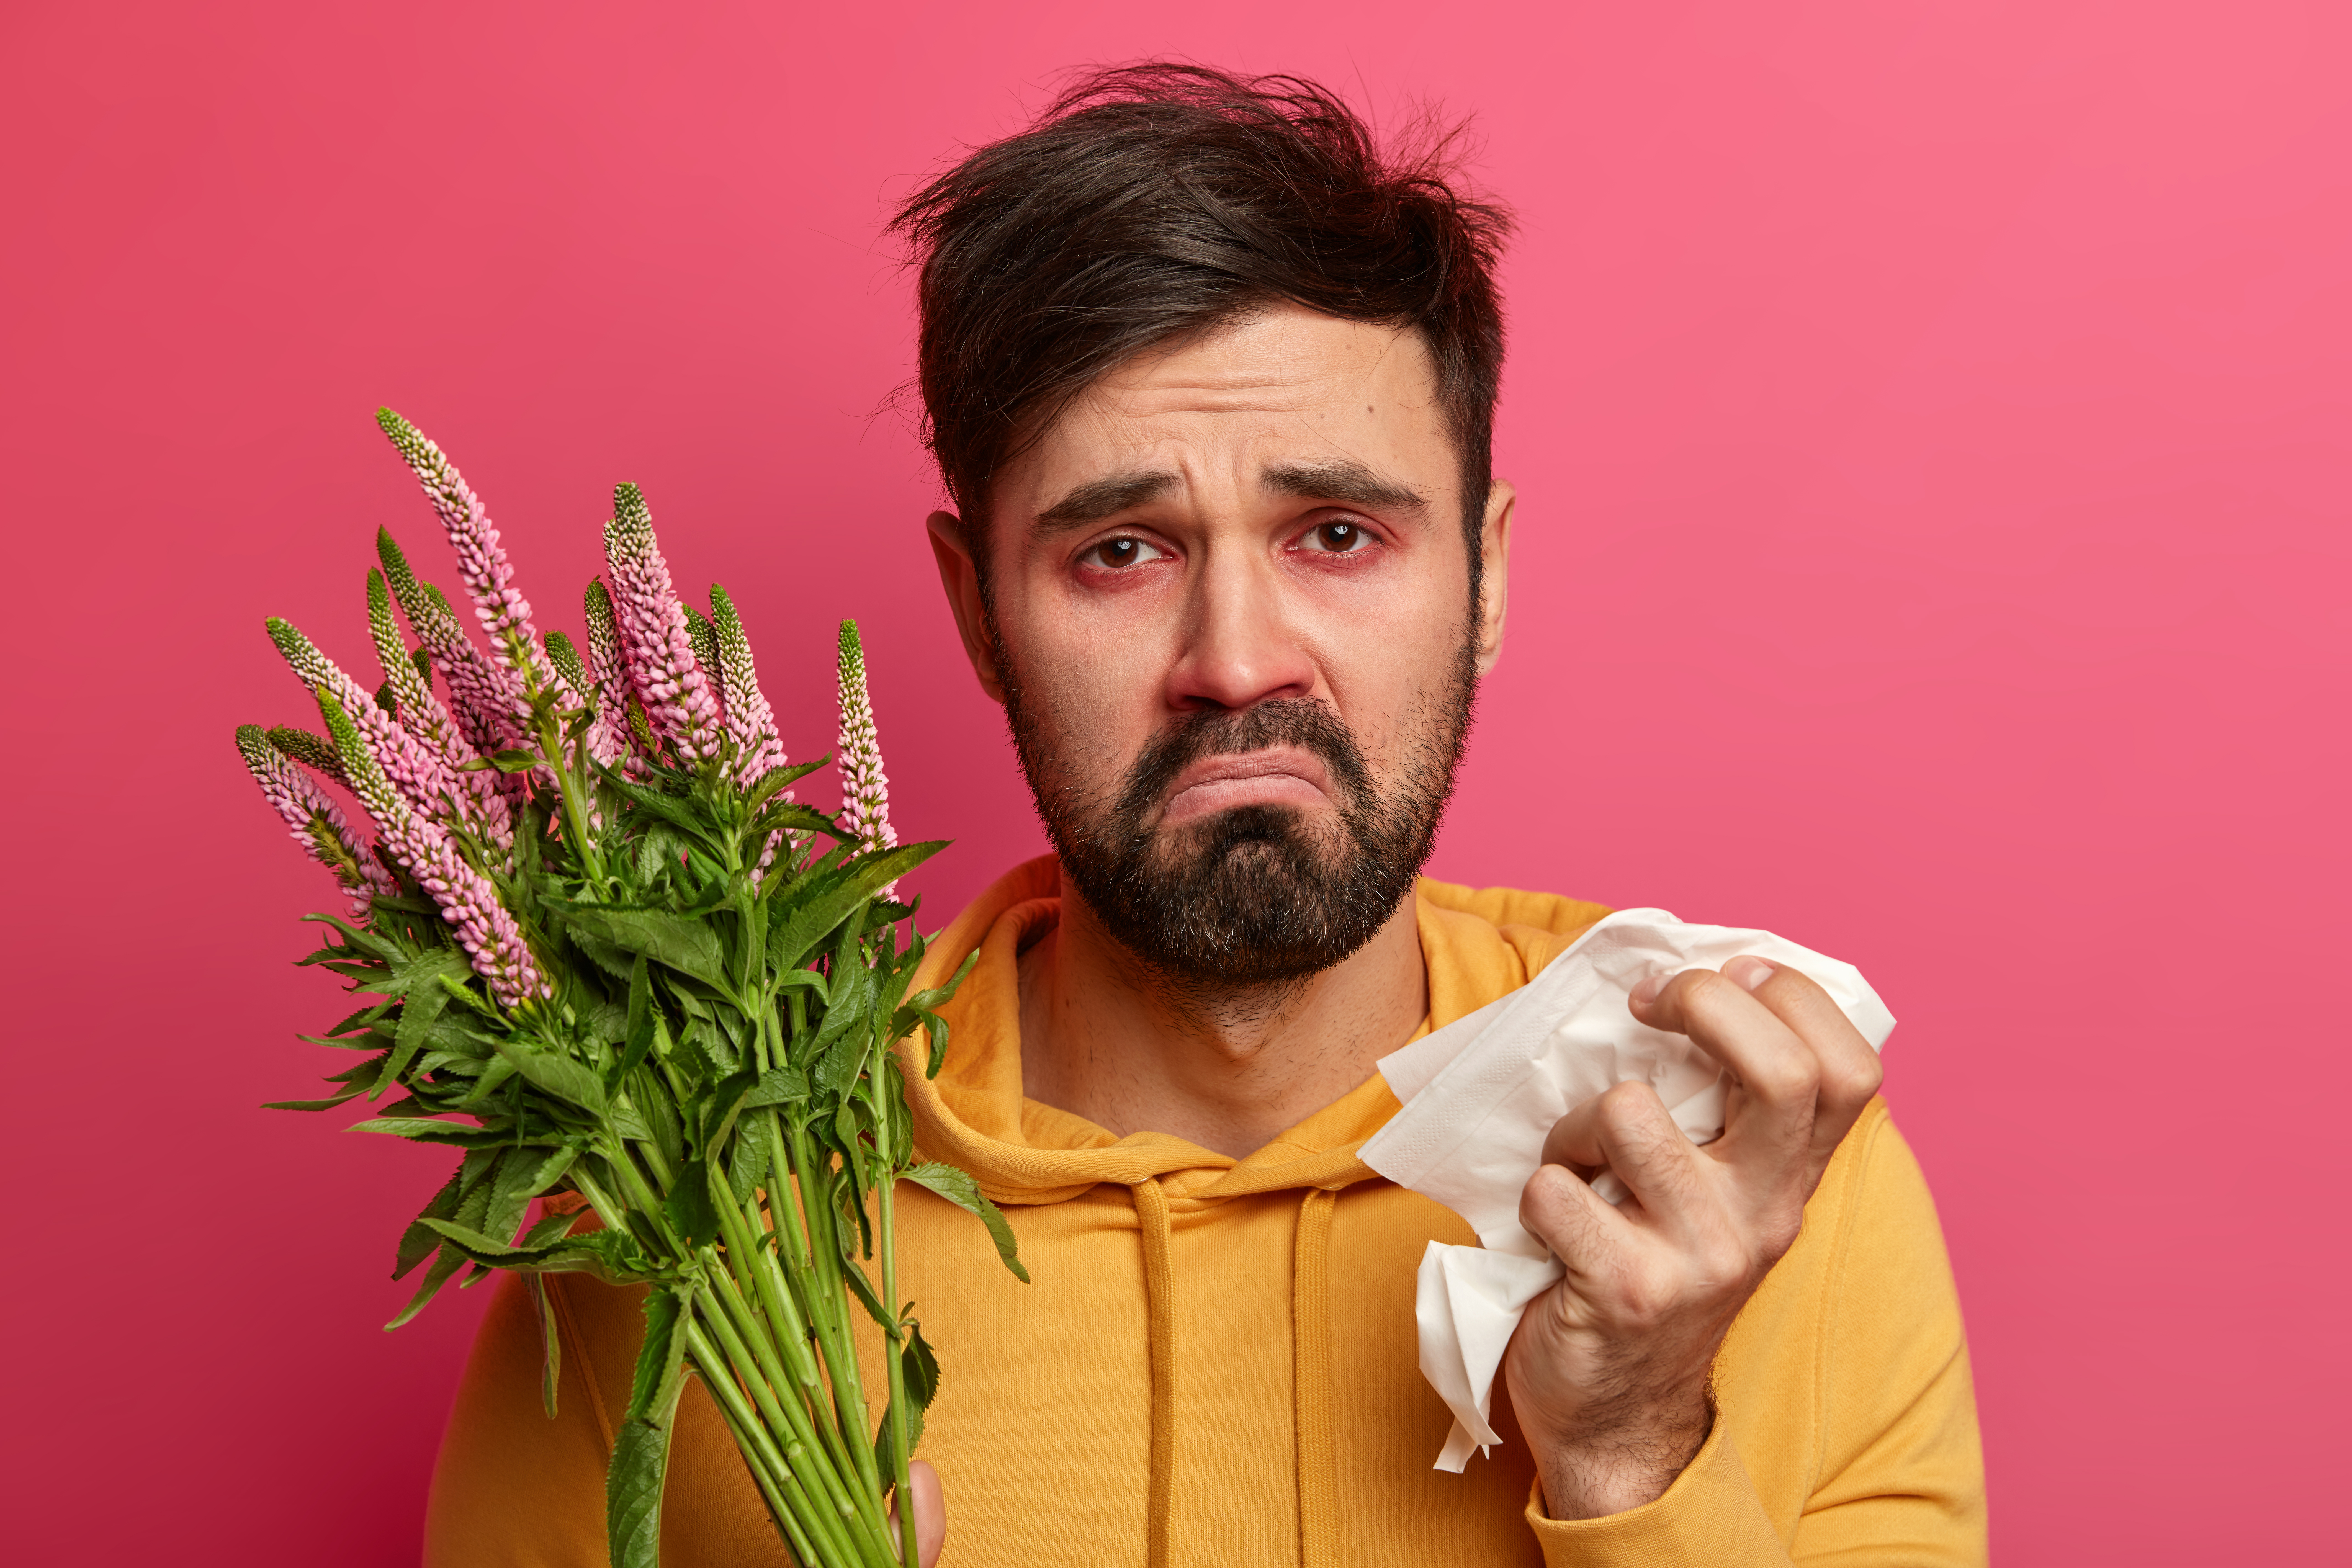 Hay Fever: What Is, Causes, Symptoms, Diagnostics, and Treatment